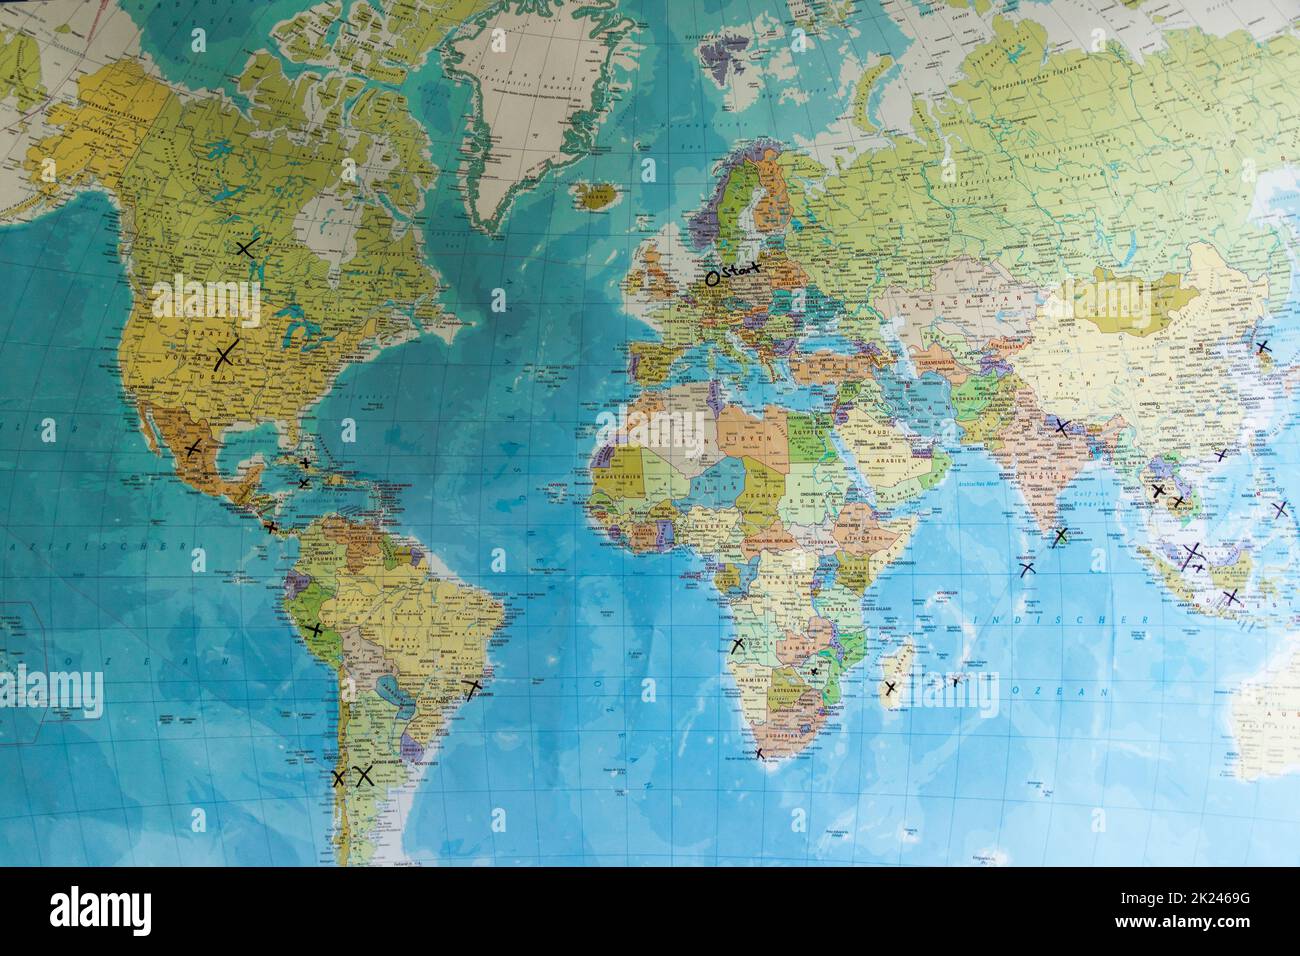 Start a world trip and plan your route on the world map. Select route from Europe via Africa to Asia. Stock Photo